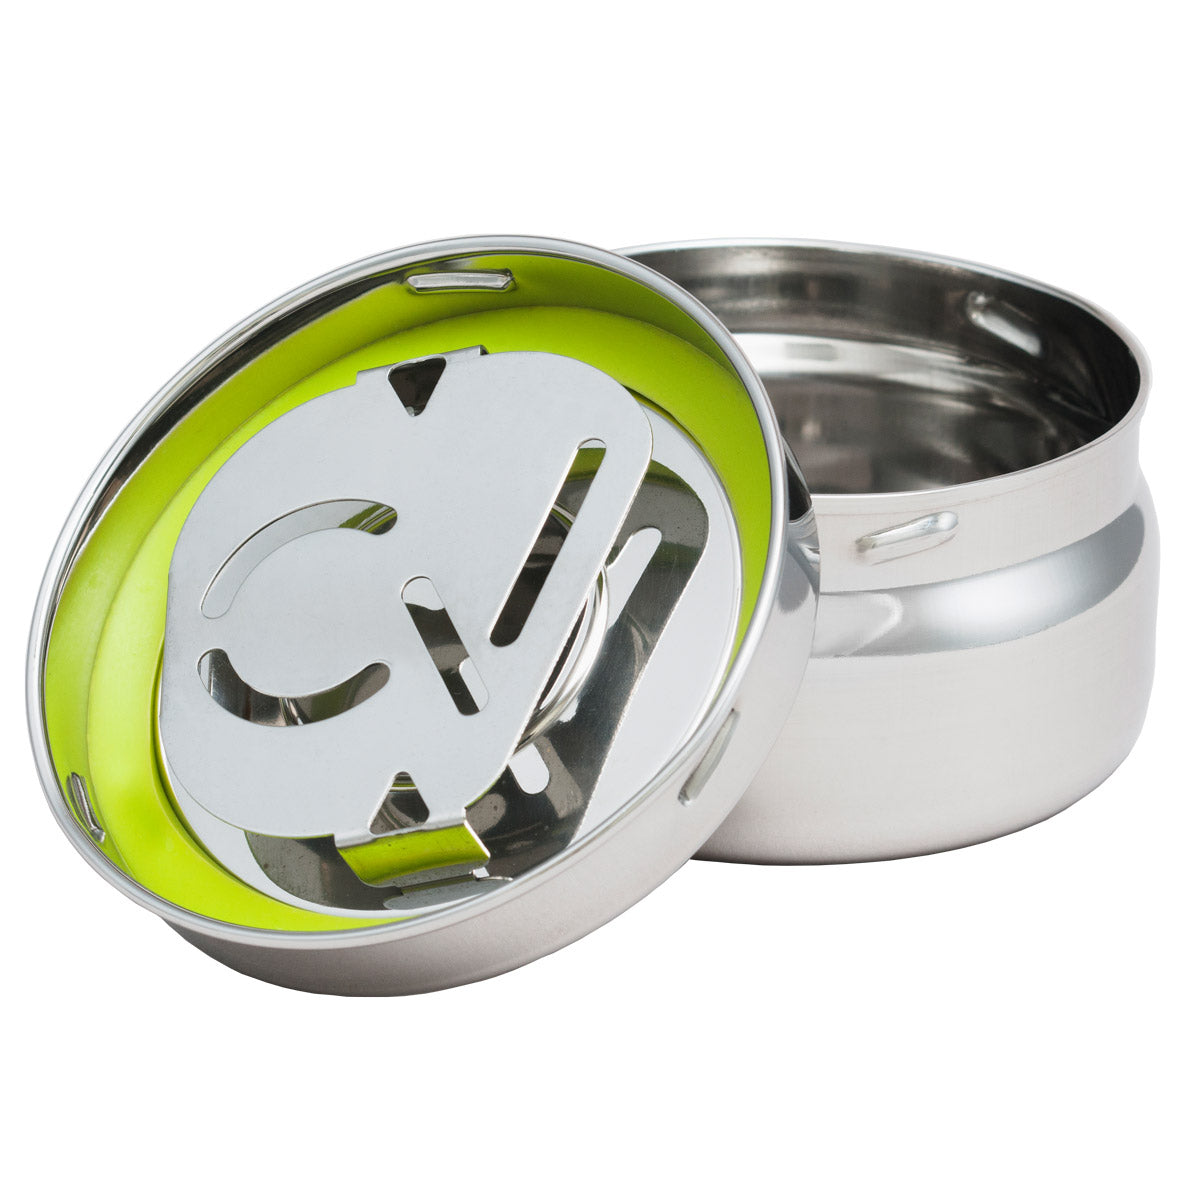 CVault Airtight Container - X-Small "TWIST"